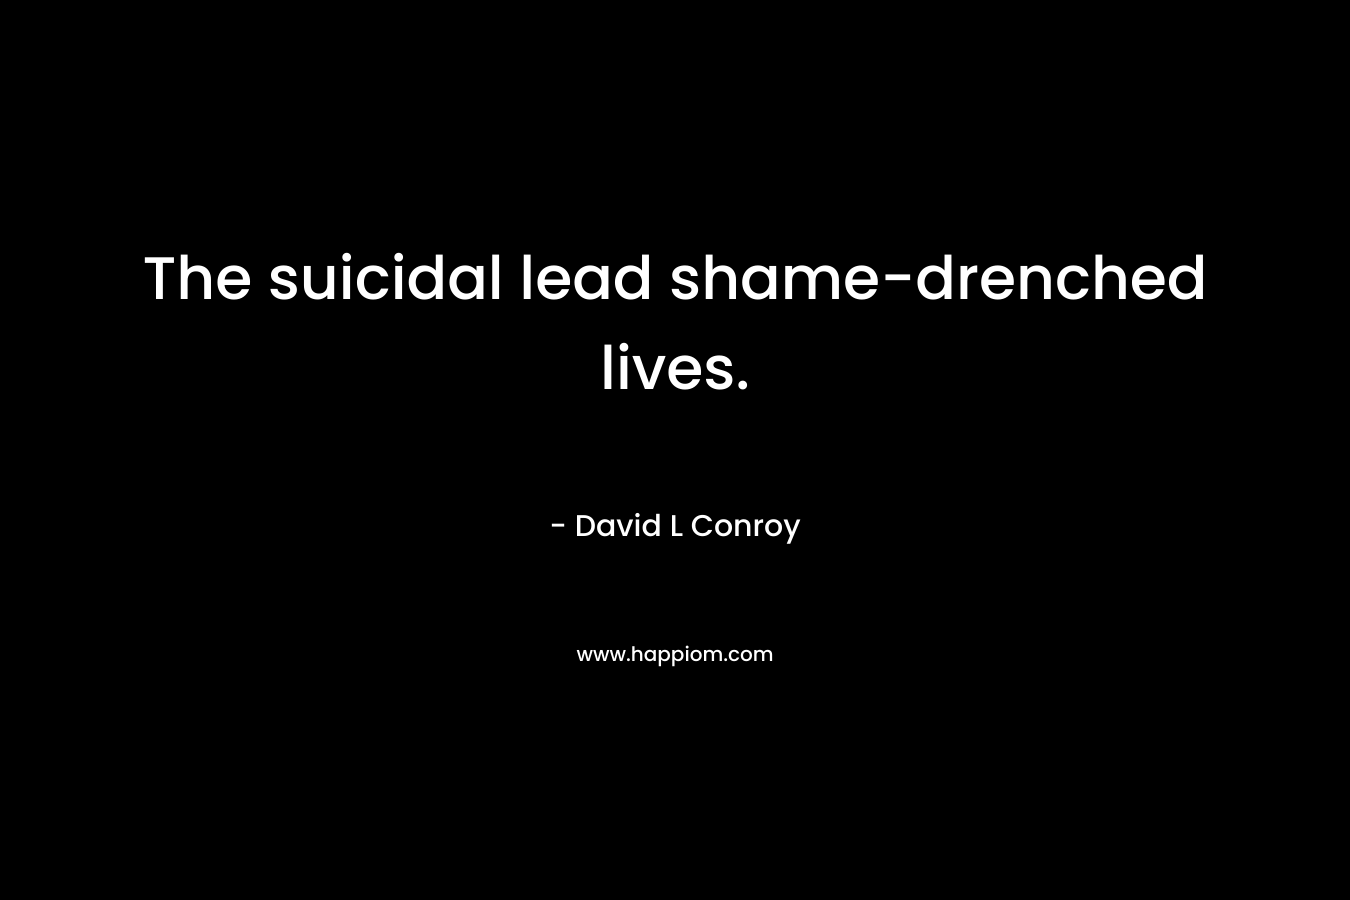 The suicidal lead shame-drenched lives. – David L Conroy